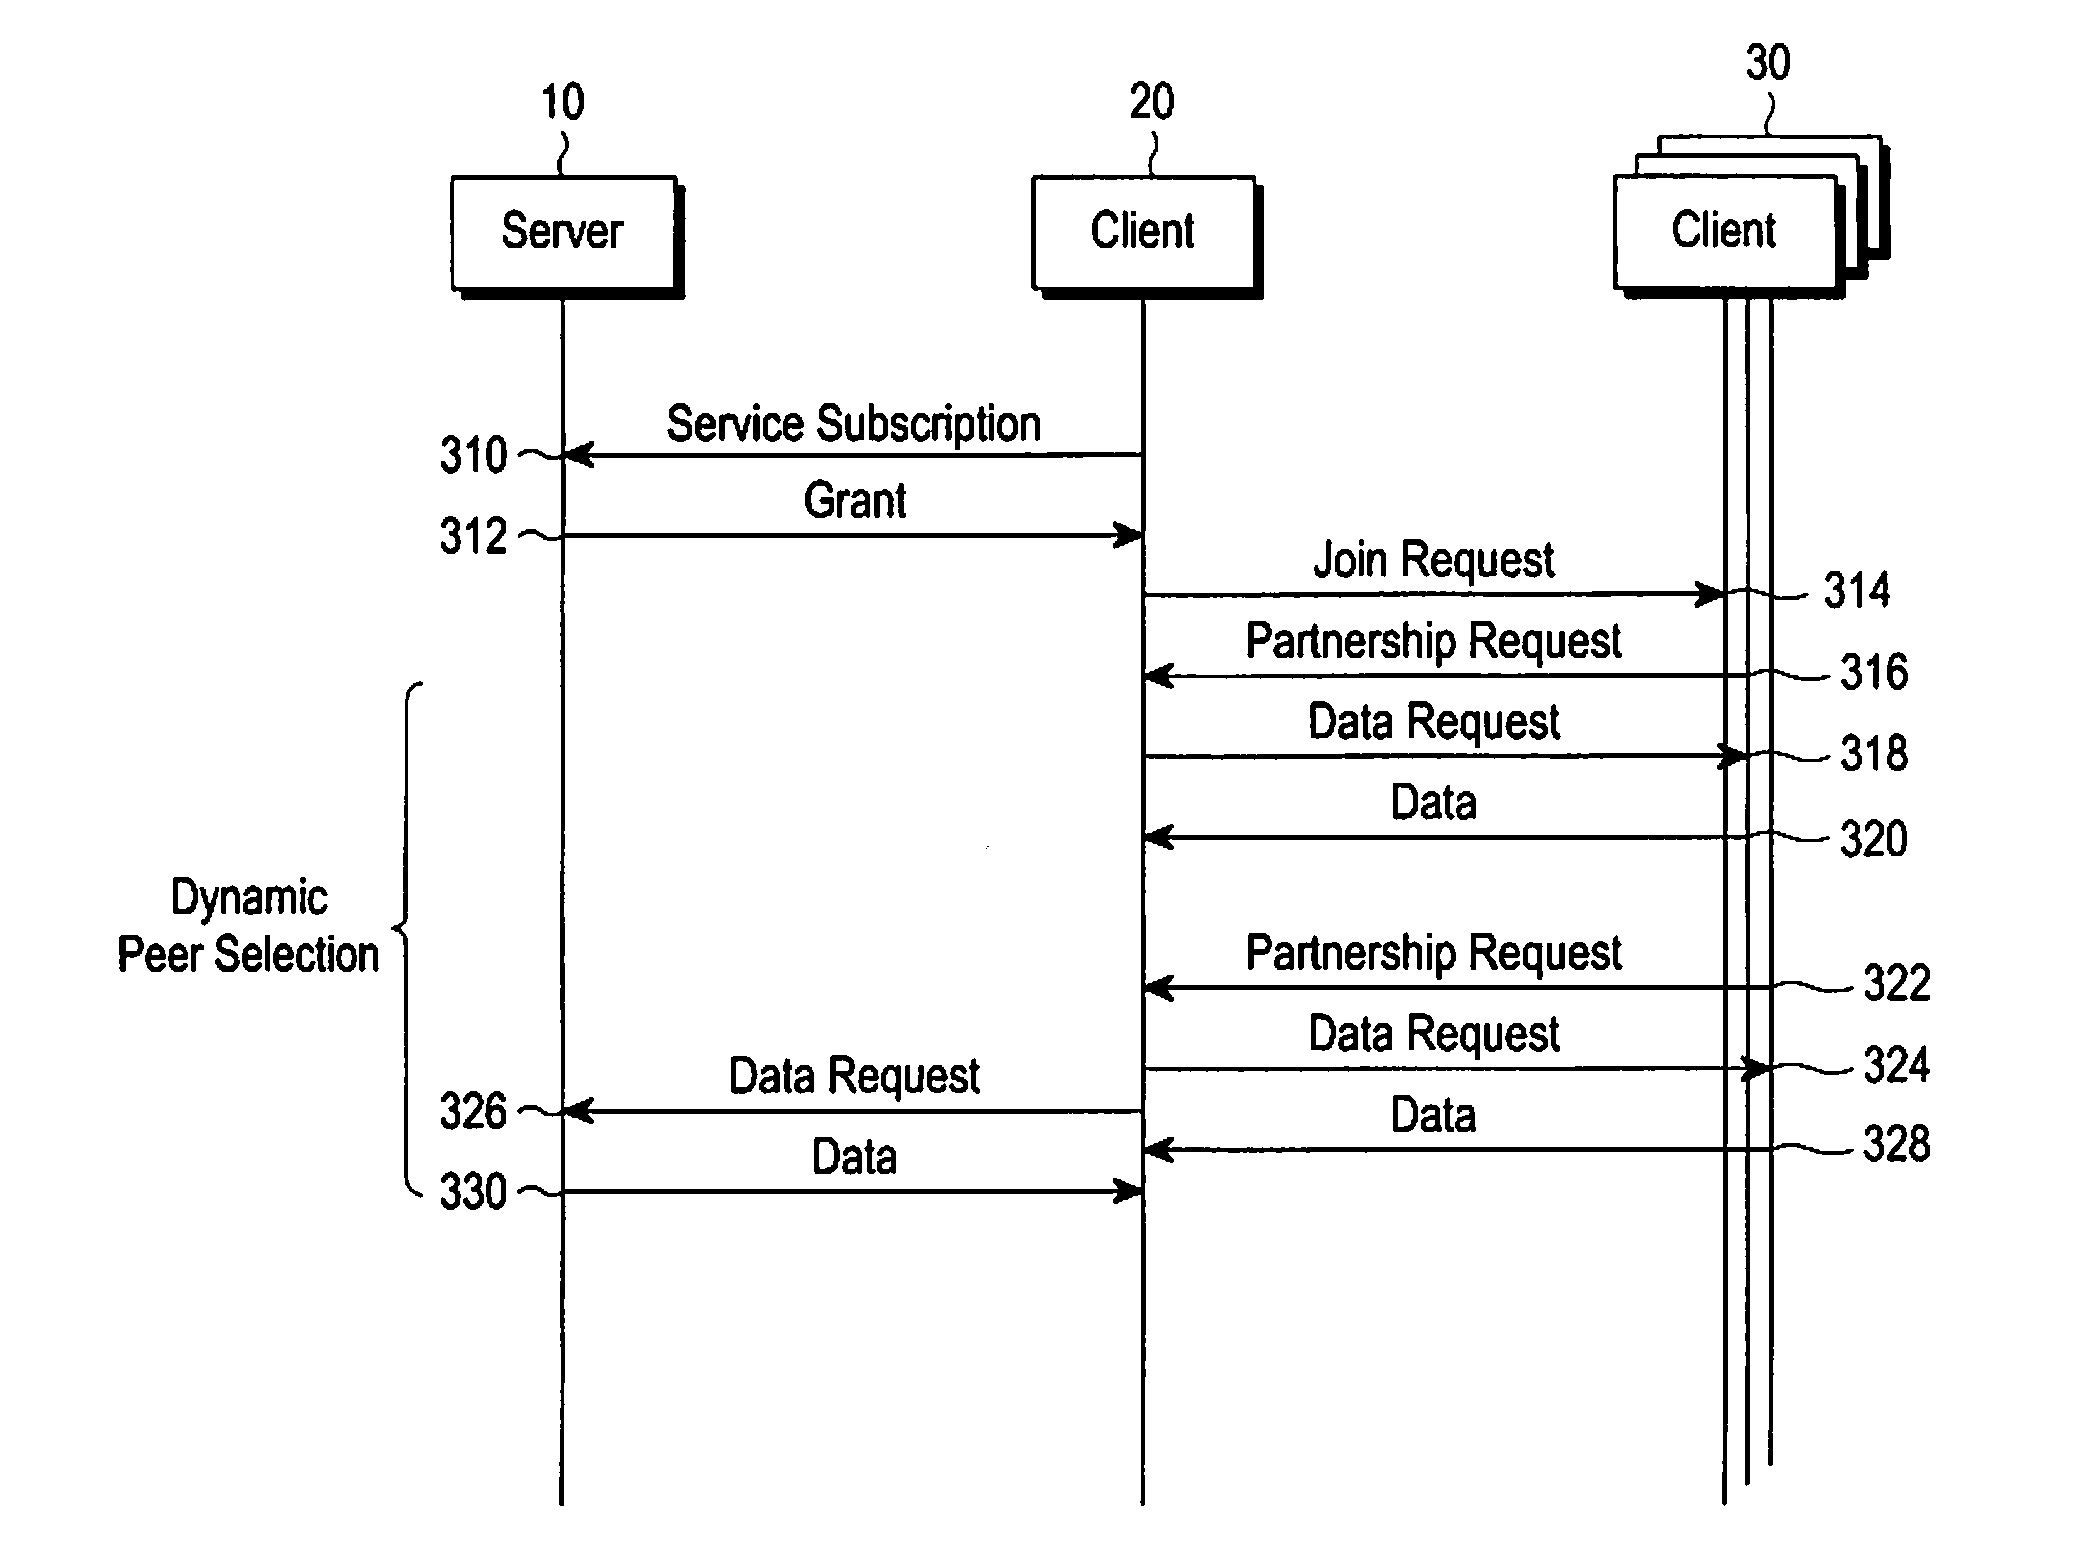 Apparatus and method for providing streaming service in a data communication network